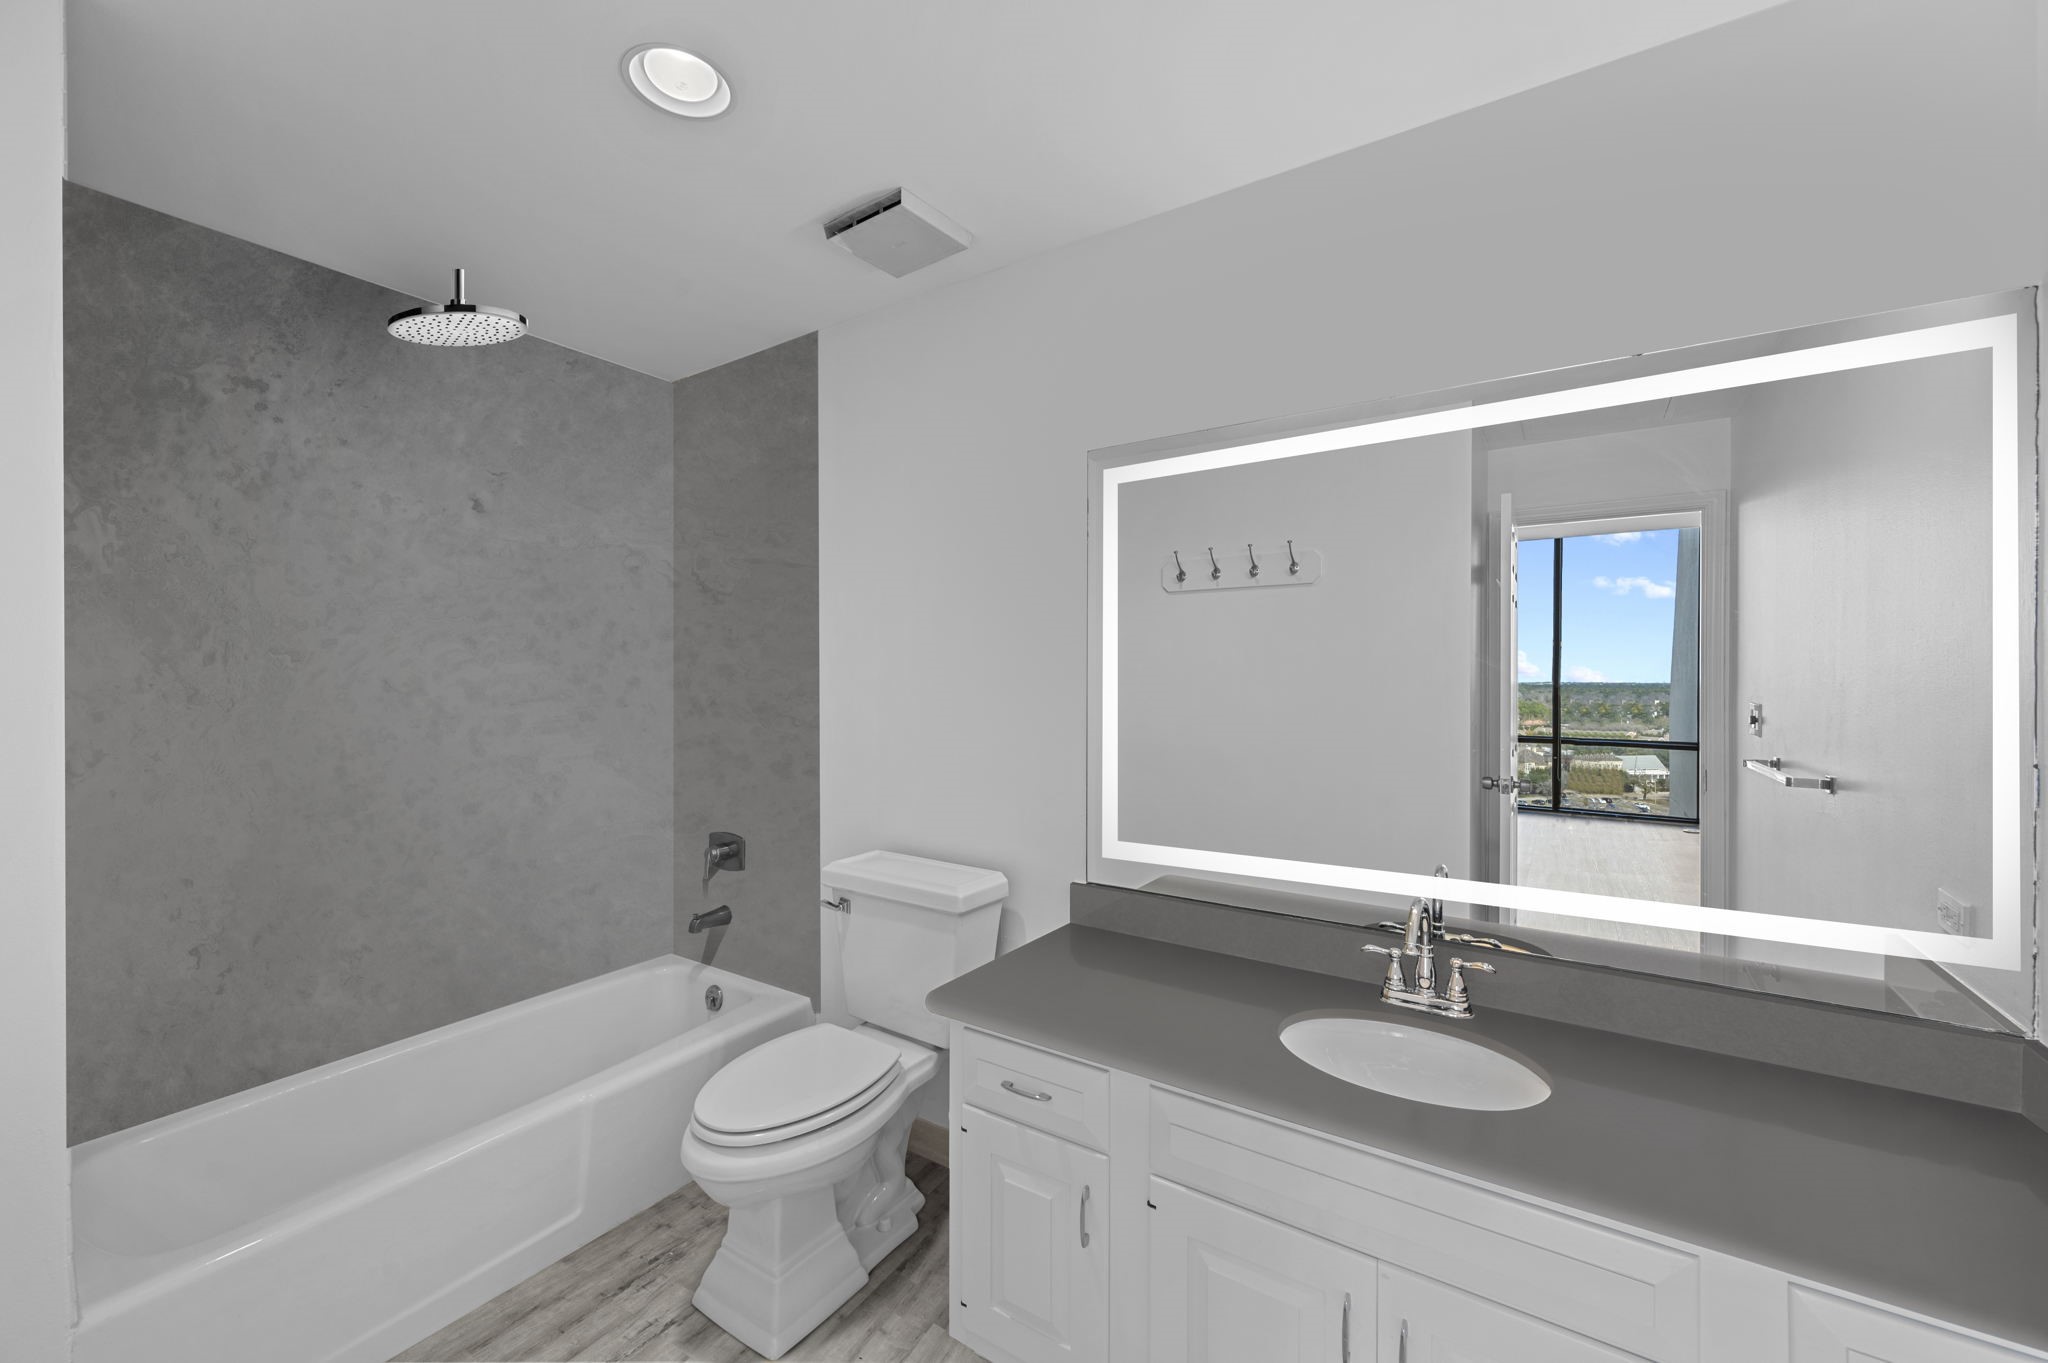 Virtual rendering of alternate finishes to the upstairs secondary bathroom.